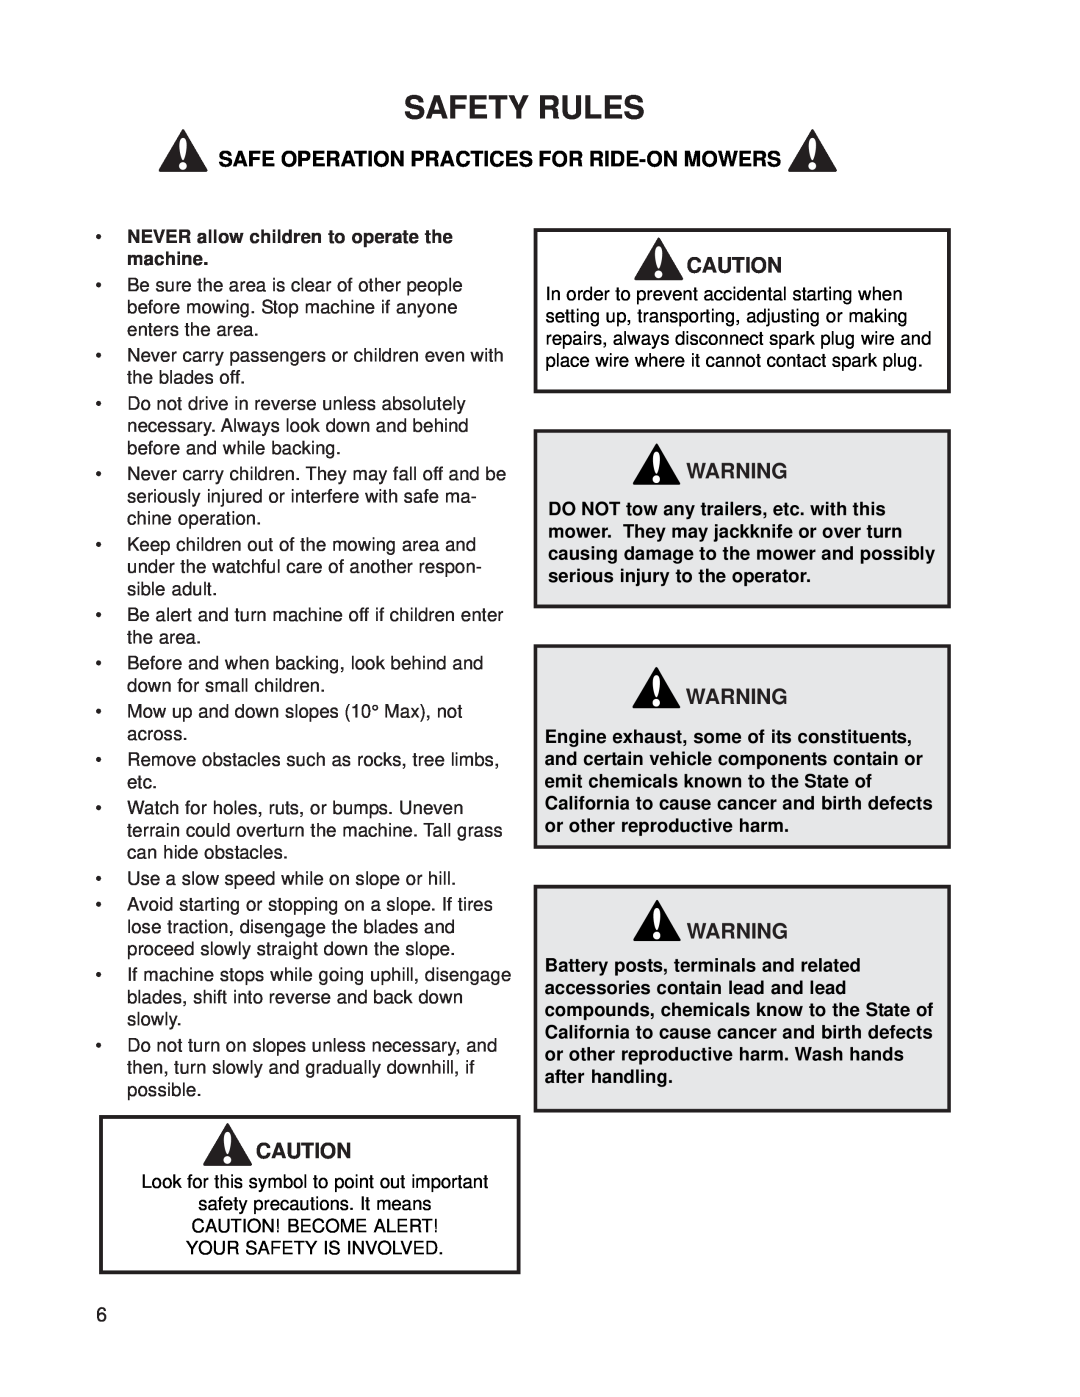 Dixon 539 131301 Safety Rules, Safe Operation Practices For Ride-On Mowers, NEVER allow children to operate the machine 